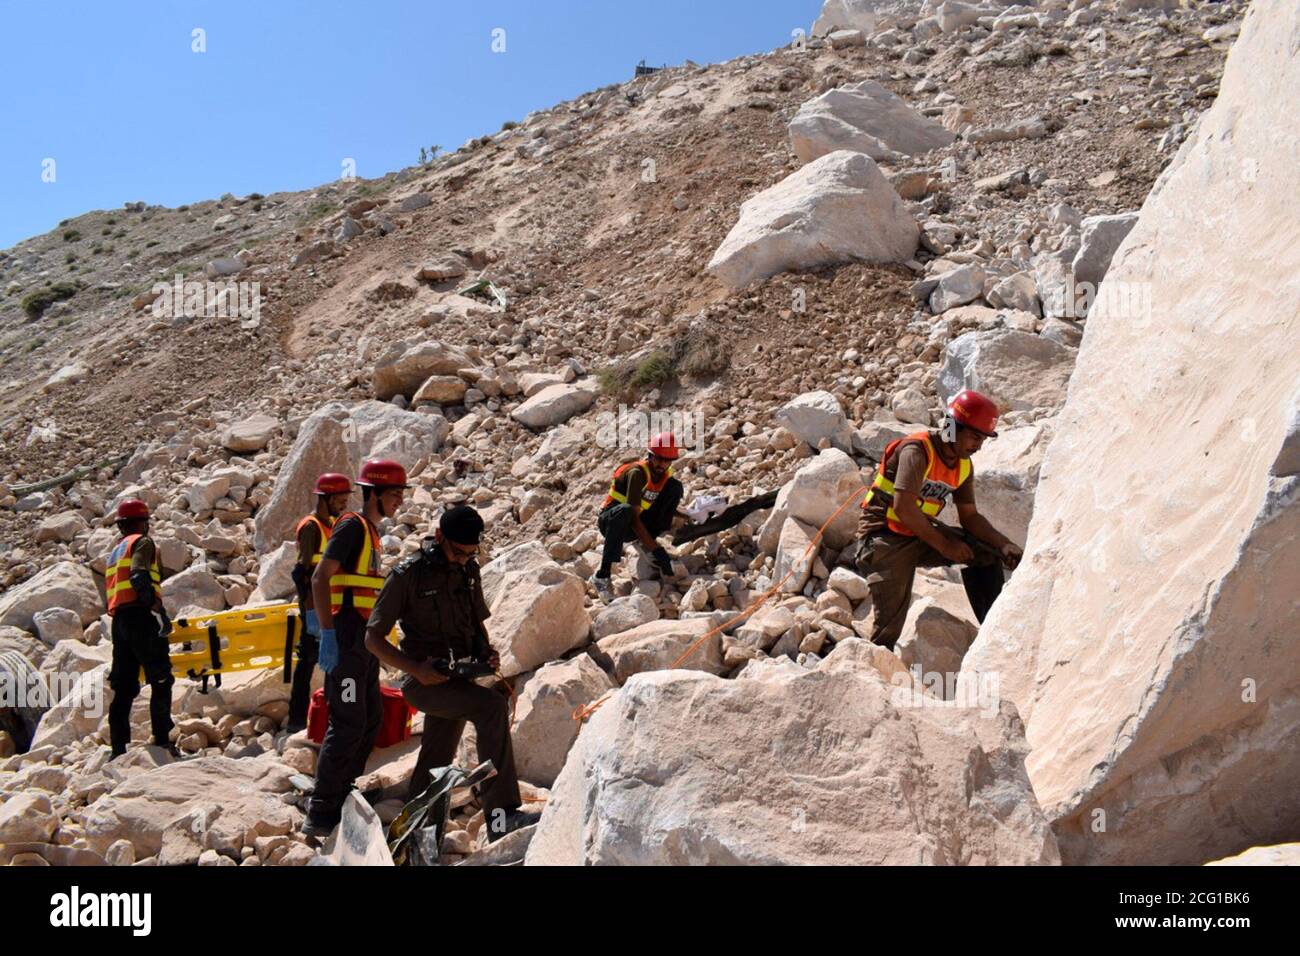 Mohmand, Pakistan. 8th Sep, 2020. Rescuers search for miners after a rock slide at a marble mine in Pakistan's northwest tribal district of Mohmand, on Sept. 8, 2020. The death toll from the rock slide incident at a marble mine, which took place on Monday in Pakistan's northwest tribal district of Mohmand, climbed to 19, police and local media said on Tuesday. Credit: Str/Xinhua/Alamy Live News Stock Photo